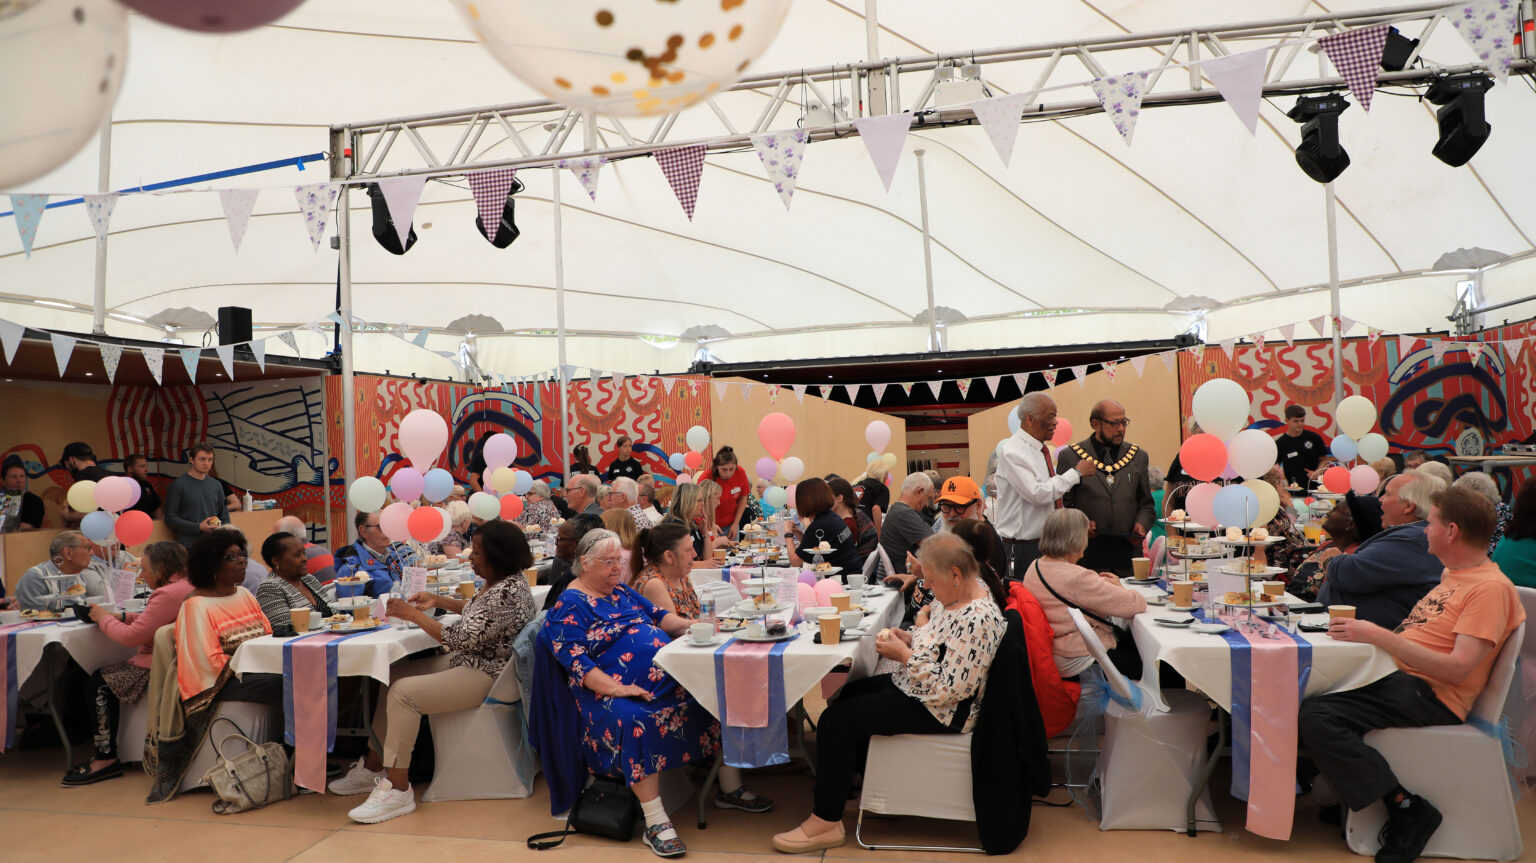 Five long tables laid with afternoon tea with balloons and bunting, it looks like a real party!